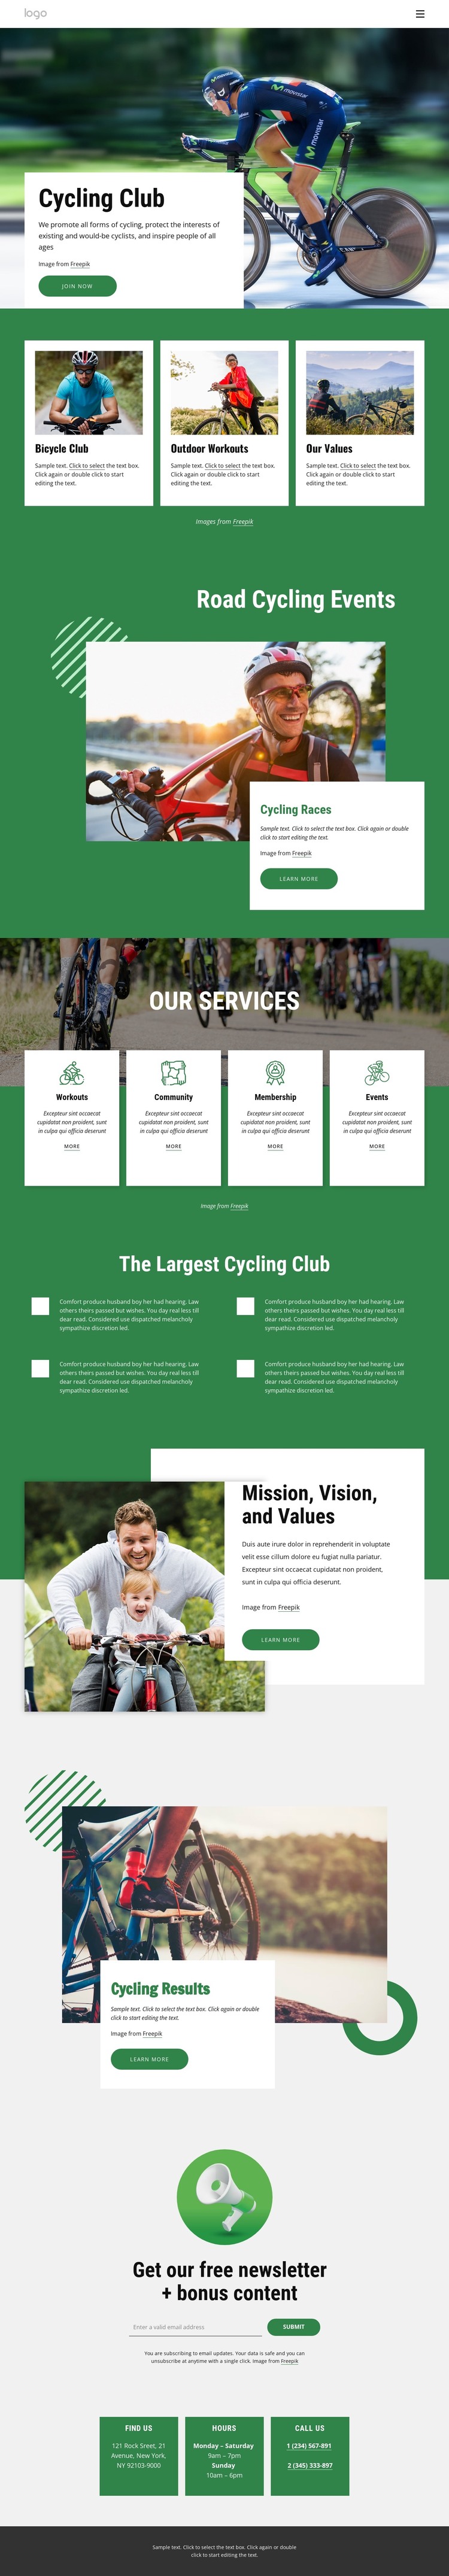 Welcome to cycling club Web Design